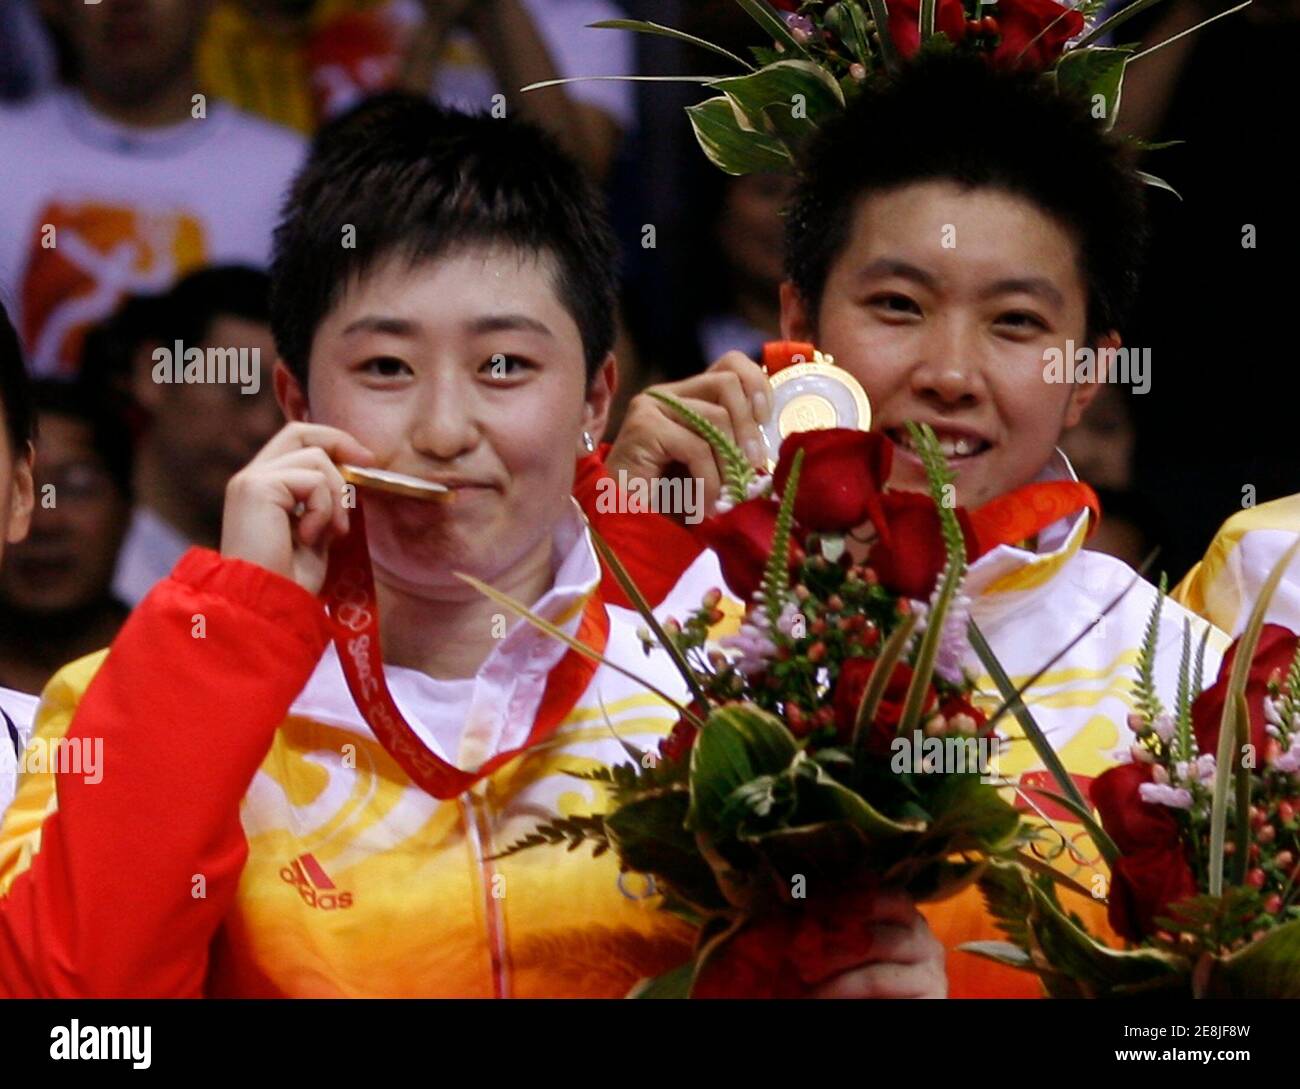 Yu Yang (L) and Du Jing of China celebrate with their gold medals after winning their women's doubles badminton final against South Korea at the Beijing 2008 Olympic Games August 15, 2008.     REUTERS/Beawiharta (CHINA) Stock Photo